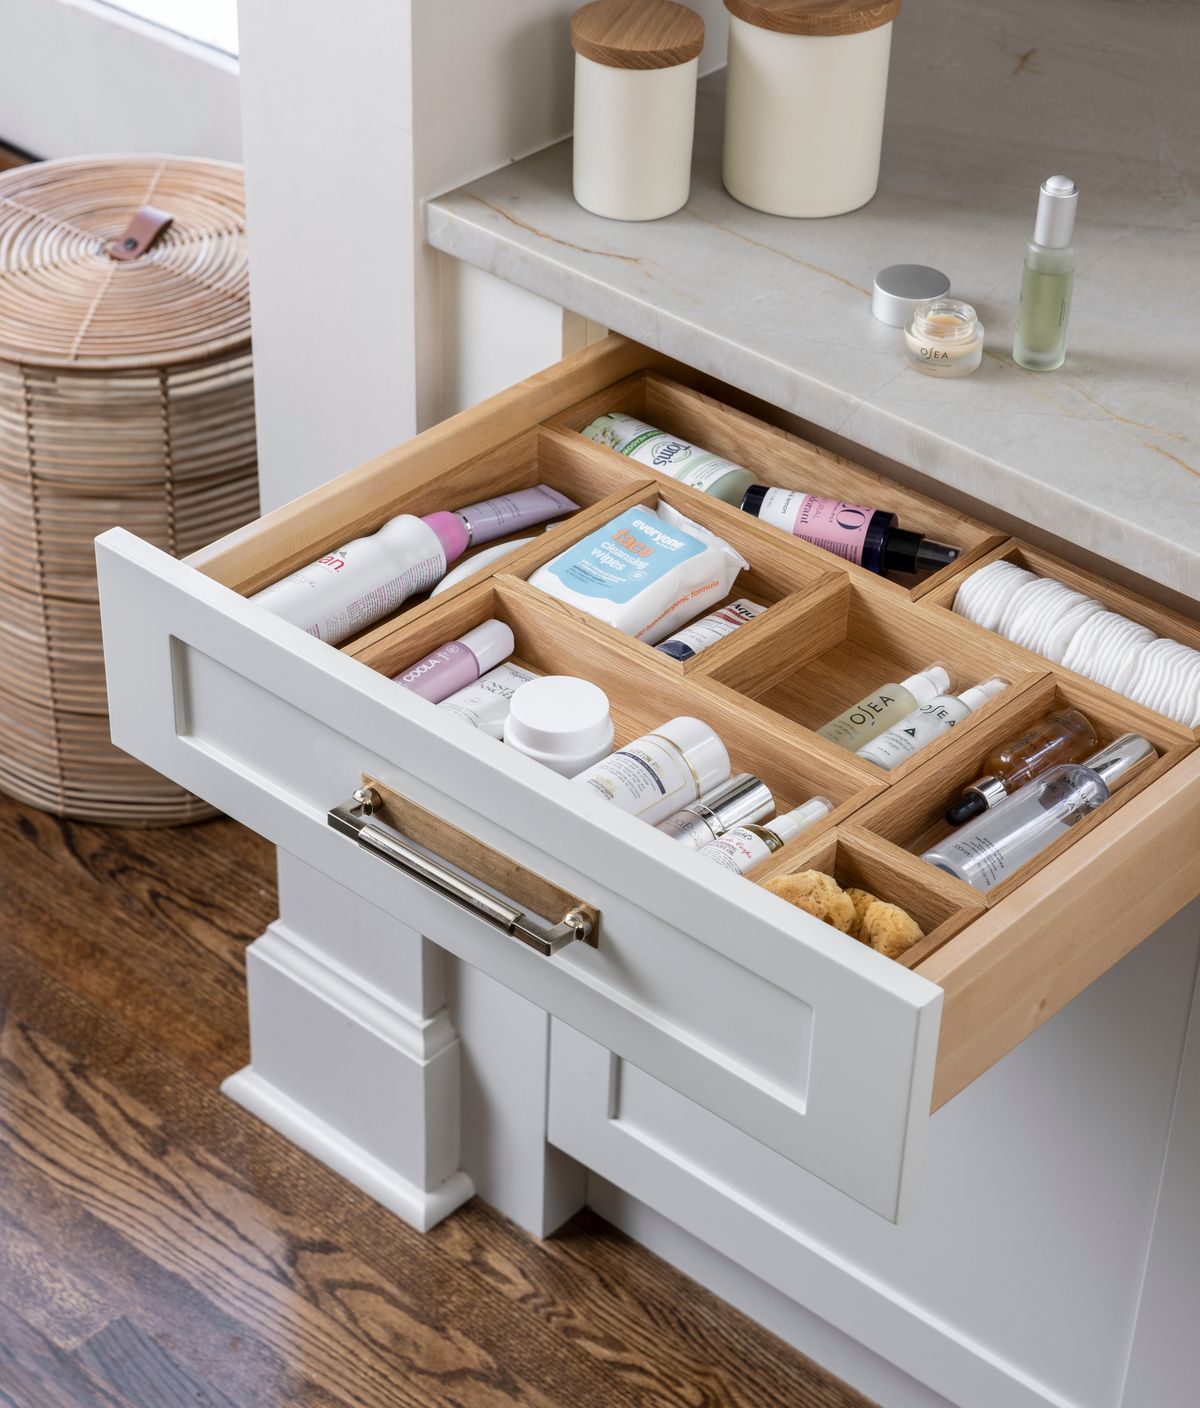 The professional organizers at Neat Method use small bins to group similar items in drawers.  (MARTIN VECCHIO)